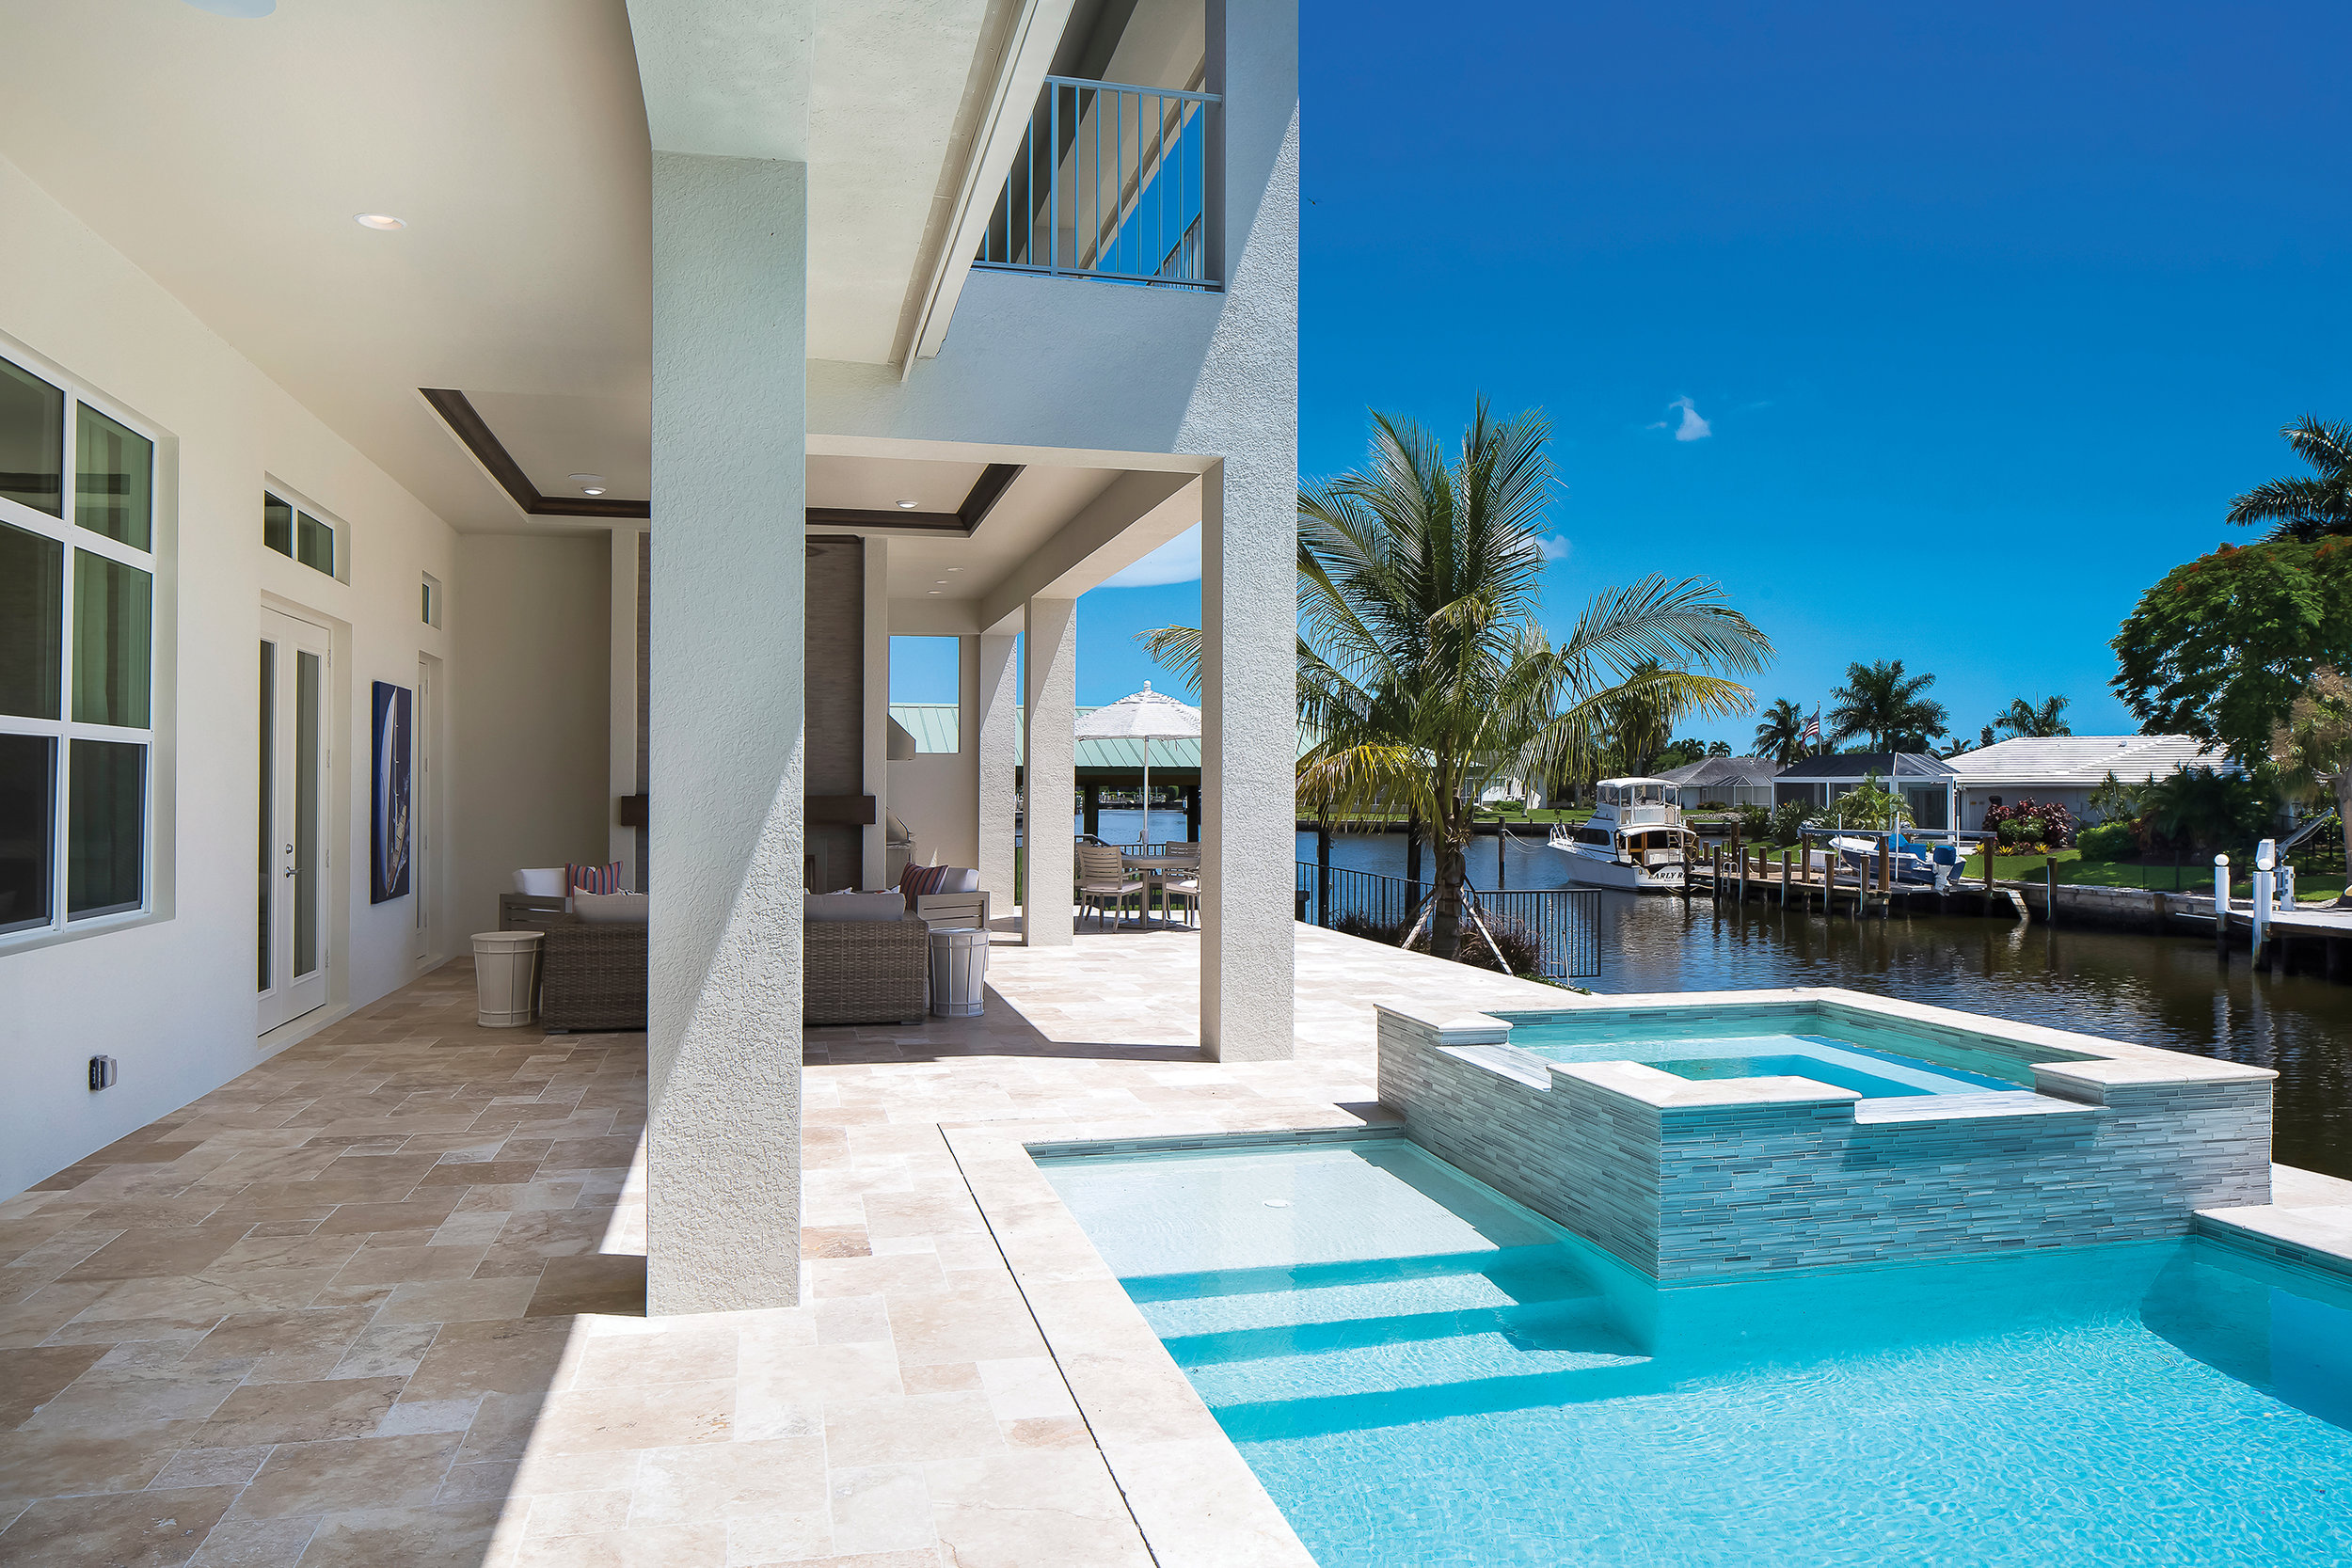  Oversized for the typical Marco Island home, the lanai allows for a nicely-proportioned pool right on the water. The aqua blue glass tiles on the spa and pool are stunning at any angle. Between the interior of the home, pool area, and the location, 